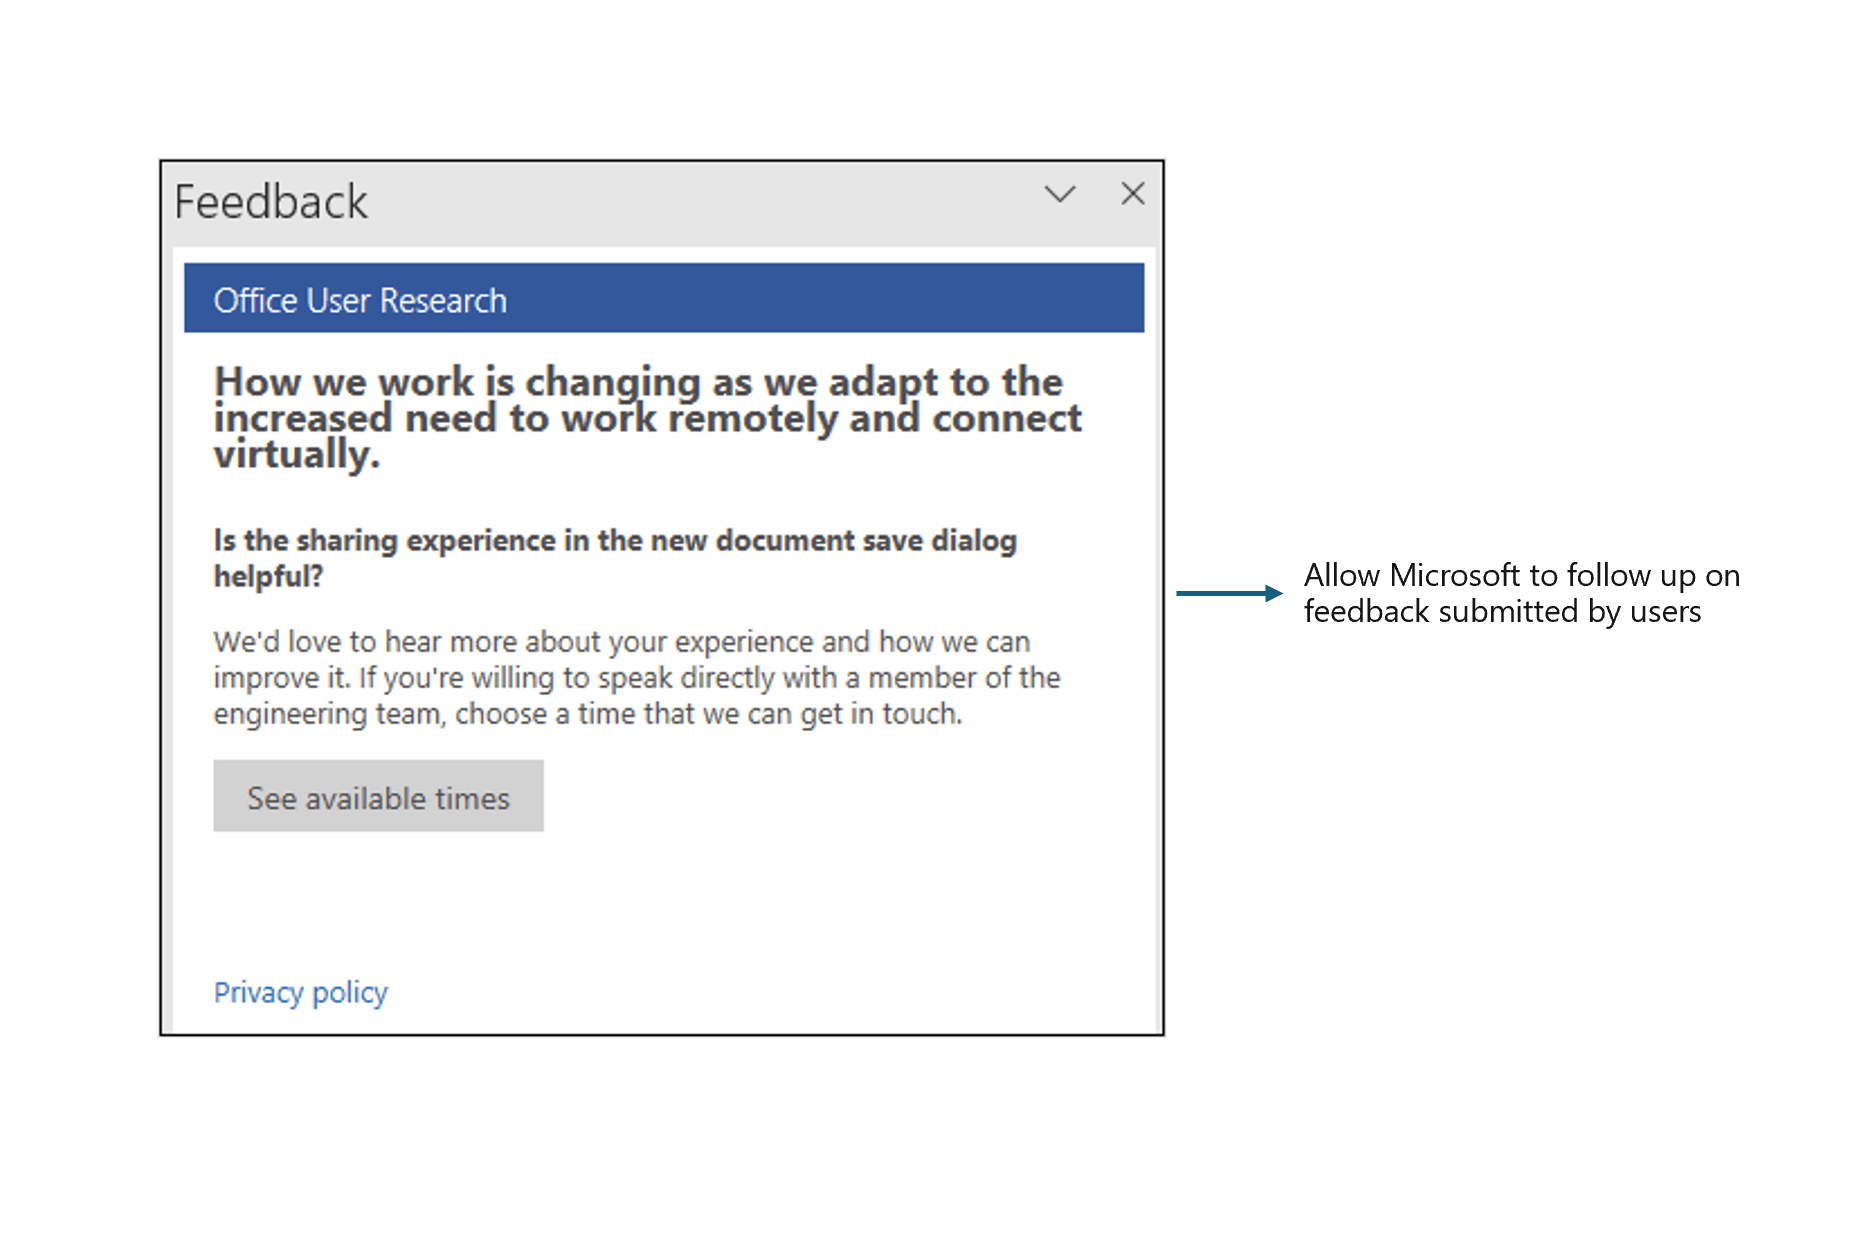 Screenshot: Example of user feedback submission to Microsoft